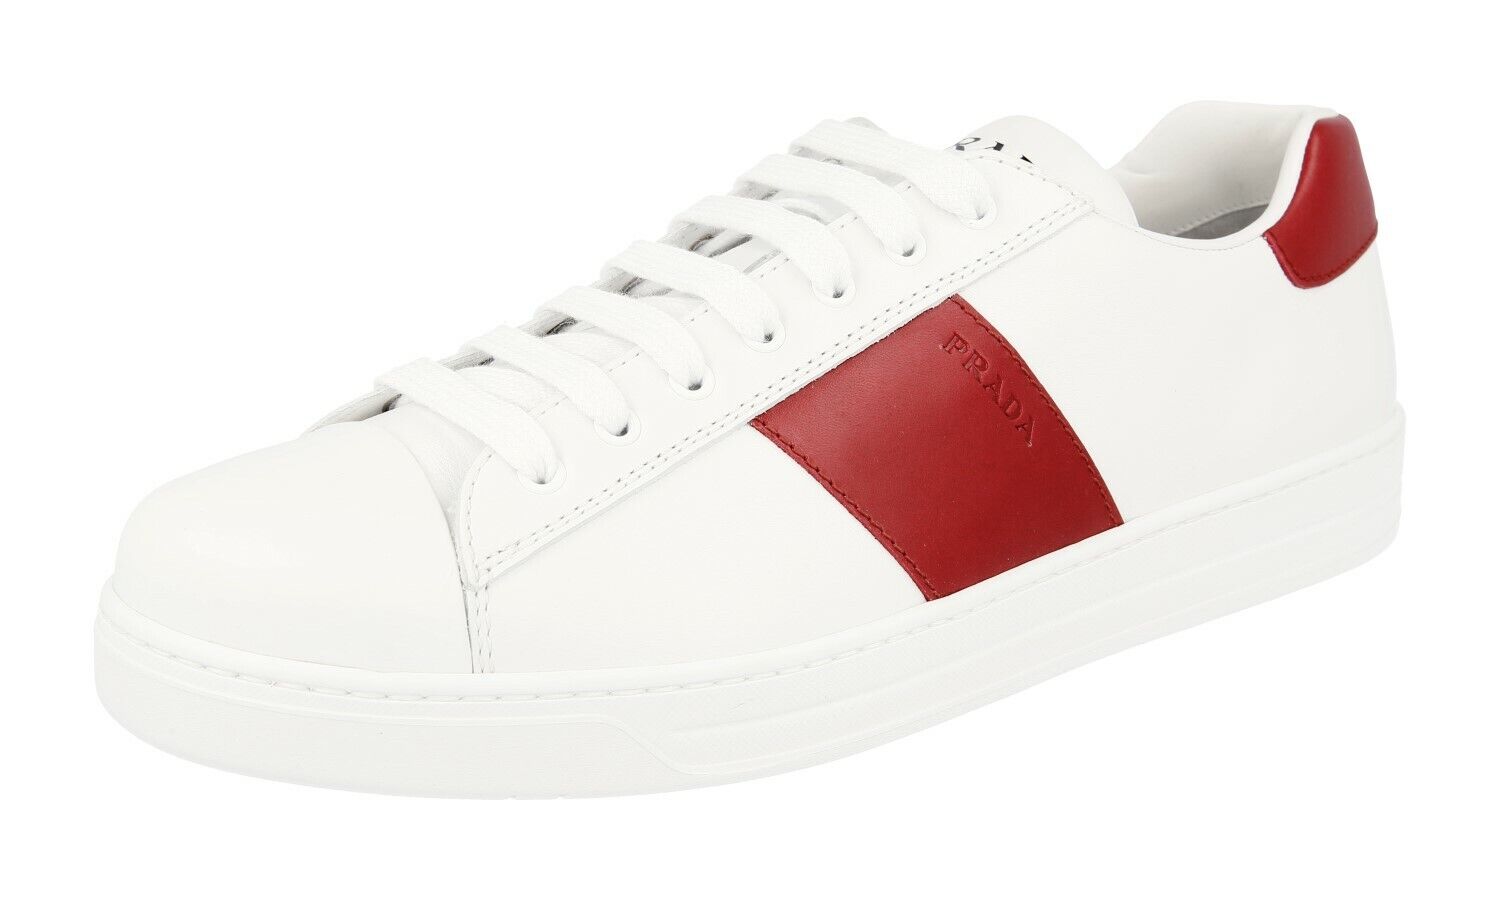 AUTH LUXURY PRADA SNEAKERS SHOES 4E3498 WHITE + RED LEATHER NEW